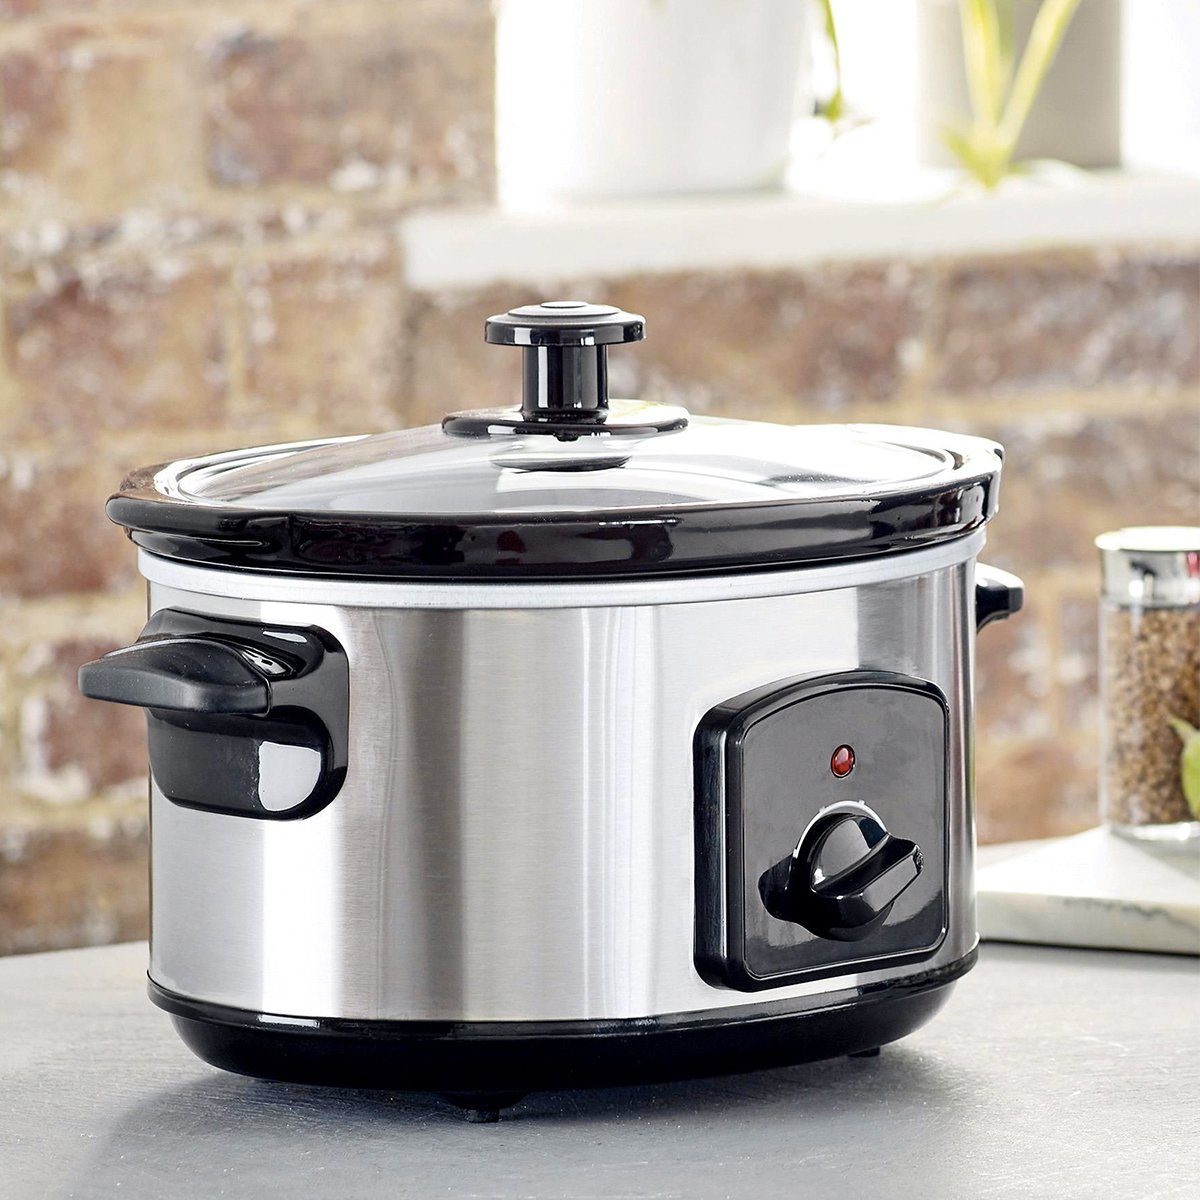 The Best Slow Cooker You Can Buy Isn't the Brand You Think